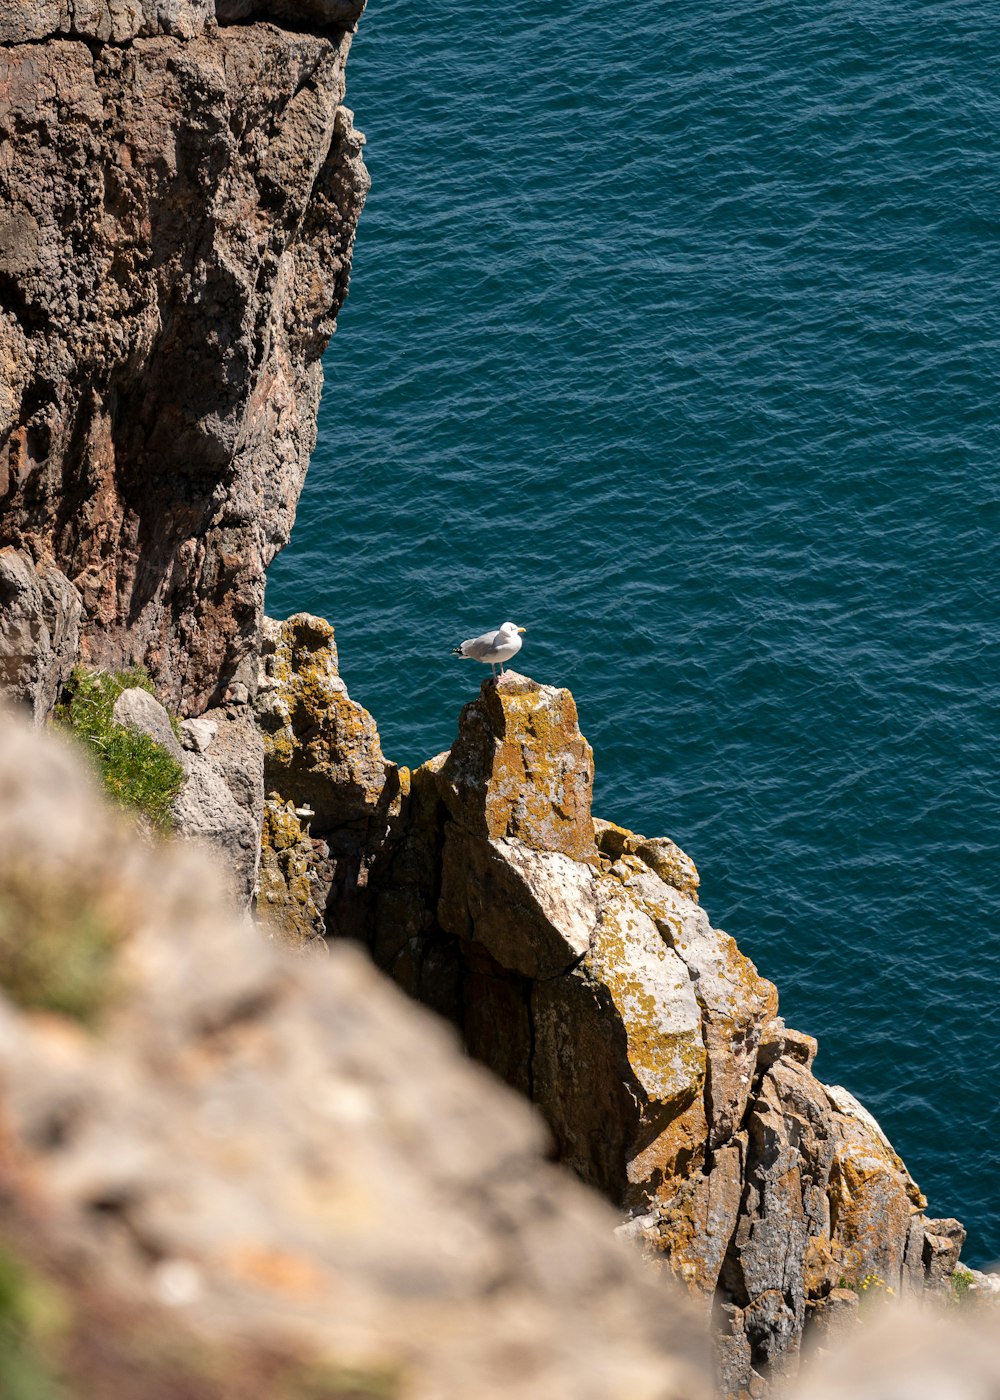 white bird on brown rock formation near blue sea during daytime